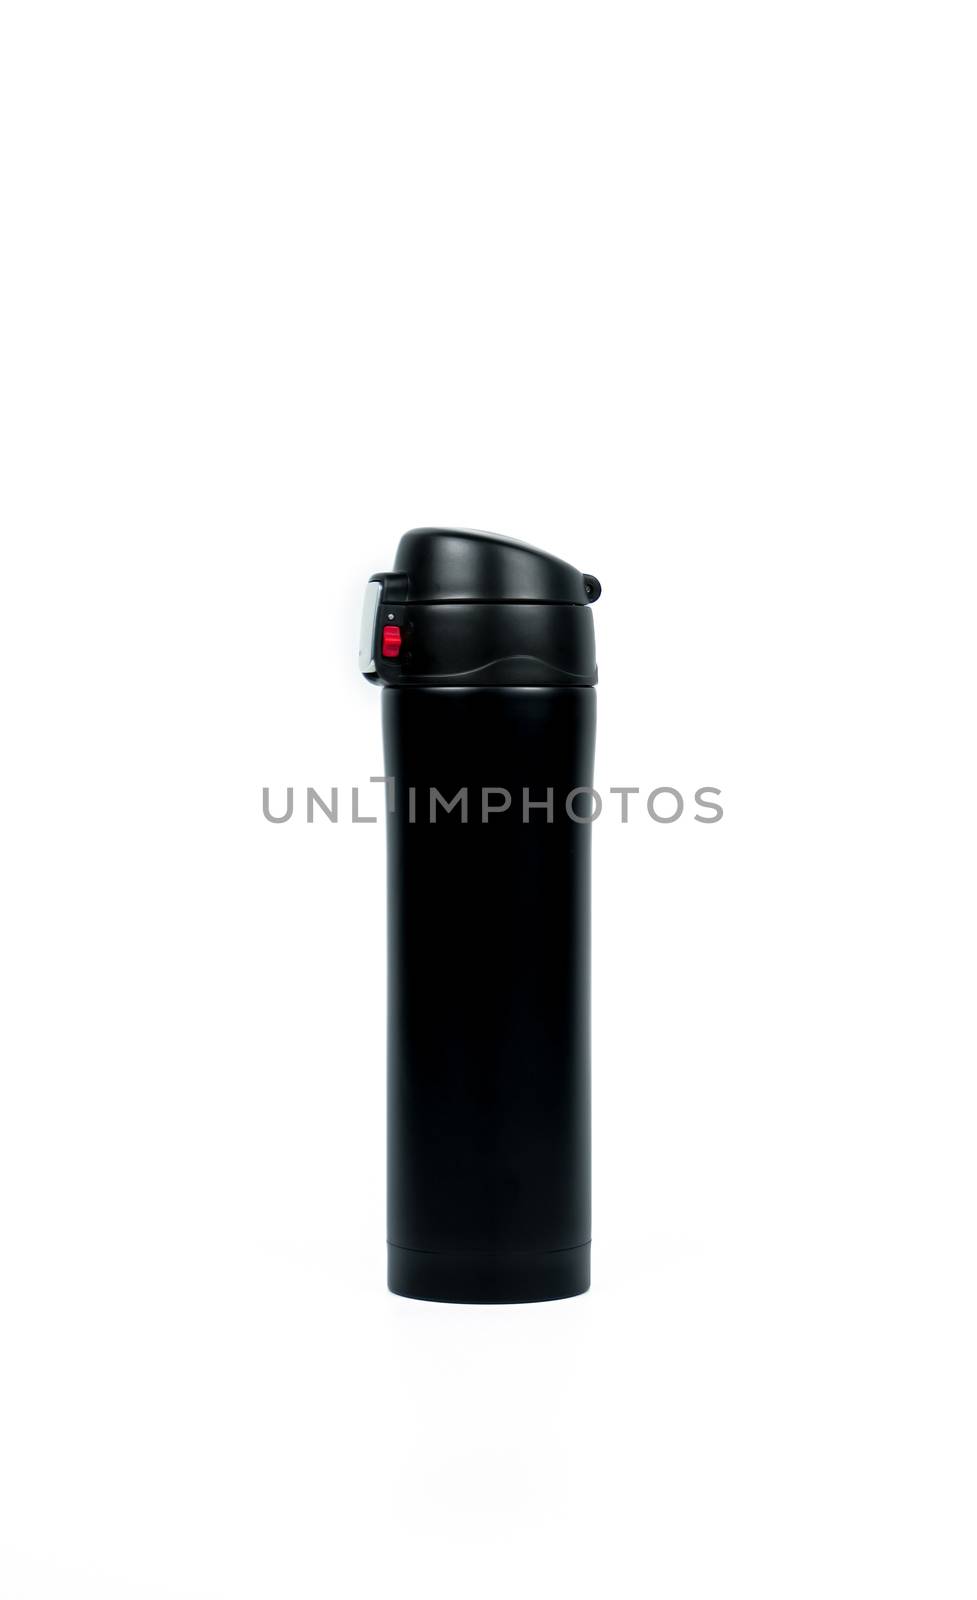 Black thermos bottle isolated on white background with copy space. Beverage container. Coffee and tea bottle. by Fahroni